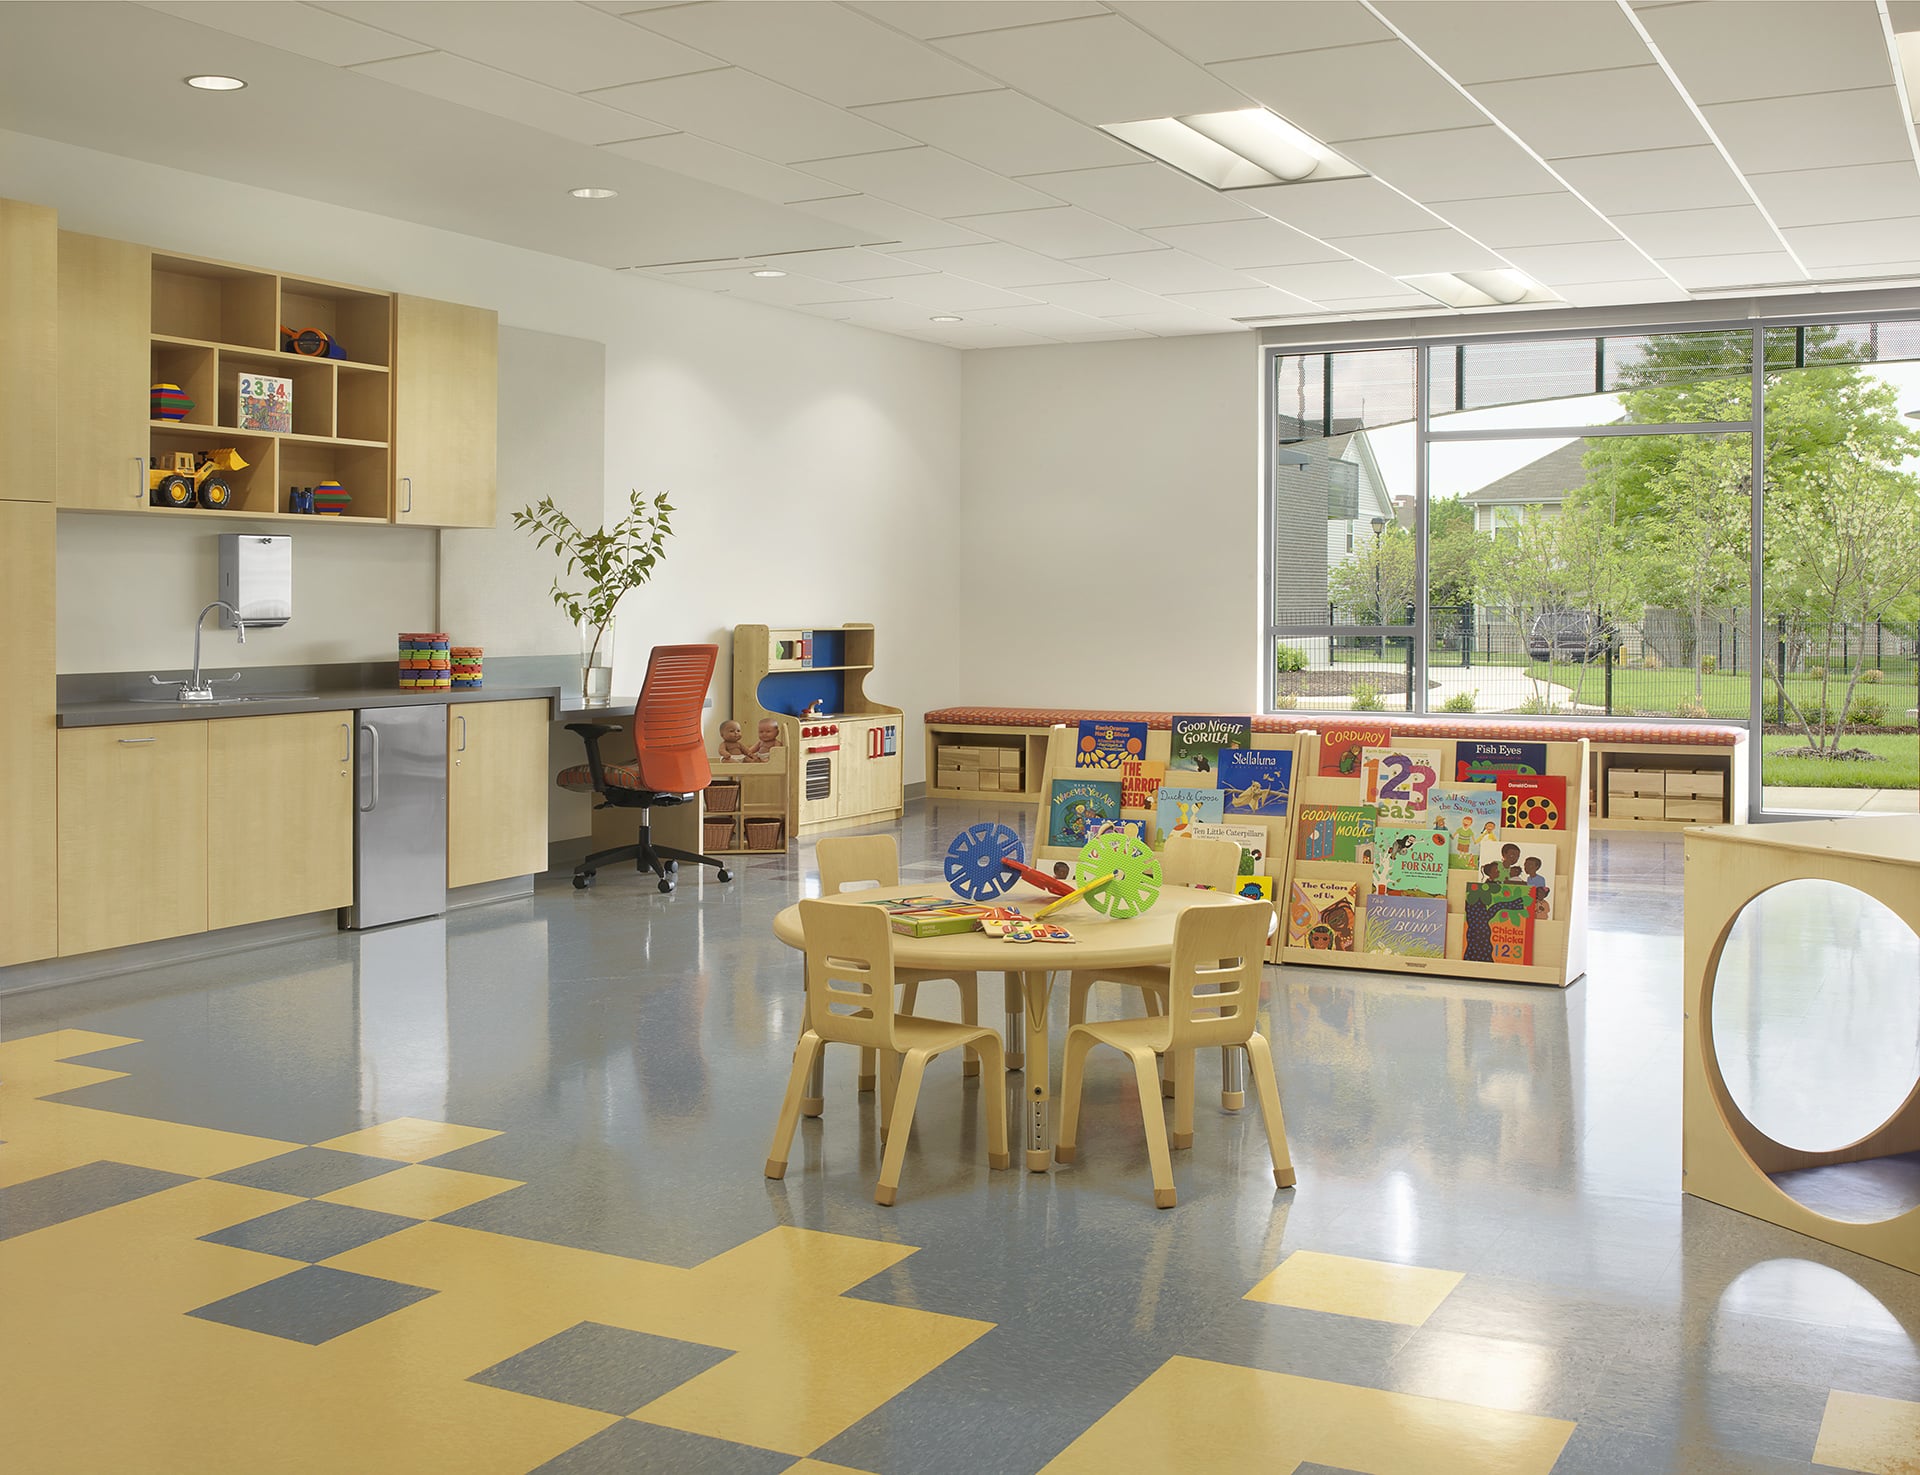 classroom of early childhood school designed by trivers architectural firm